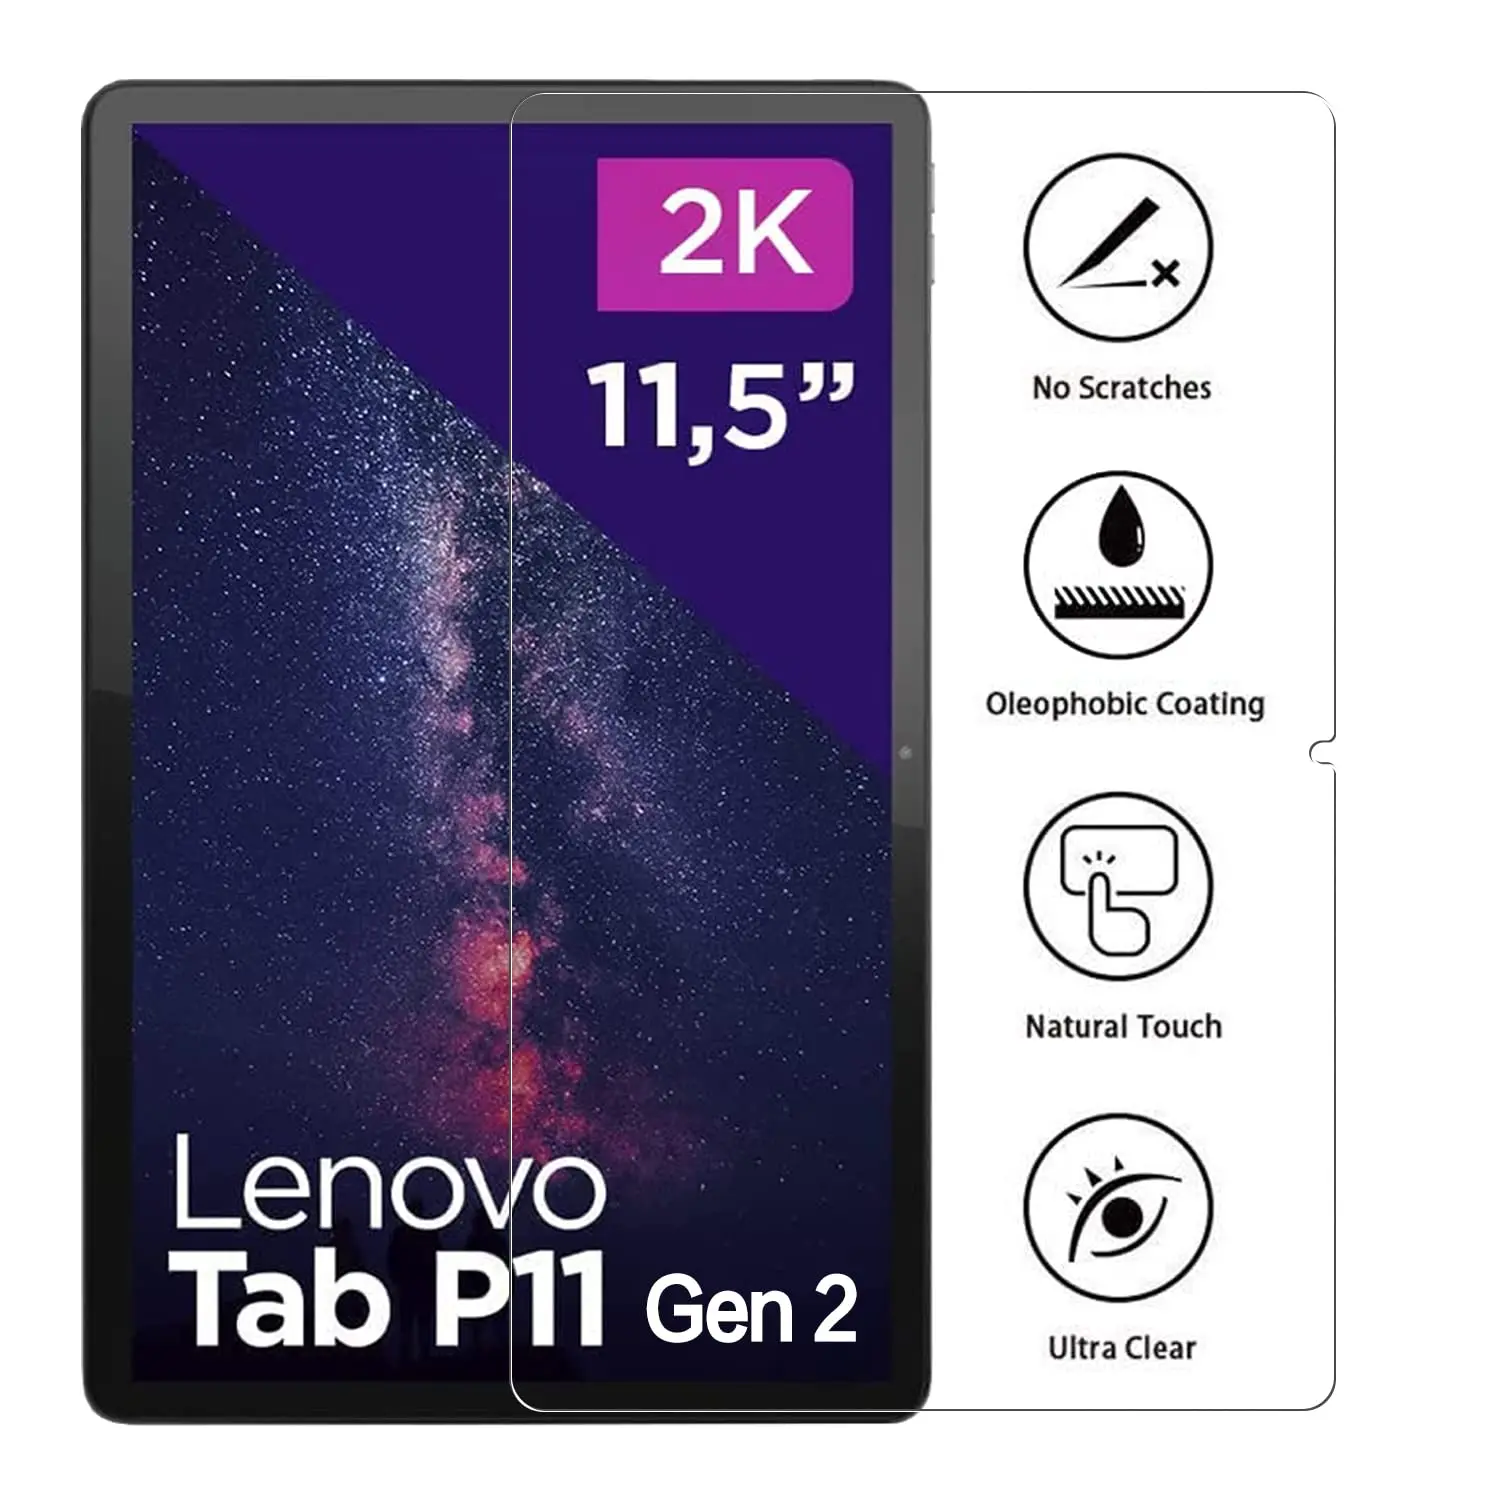 Screen Protector for Lenovo Tab P11 2nd Gen (11.5") Tempered Glass Film for Lenovo Tab P11 Gen 2 TB-350FU TB-350XC images - 6